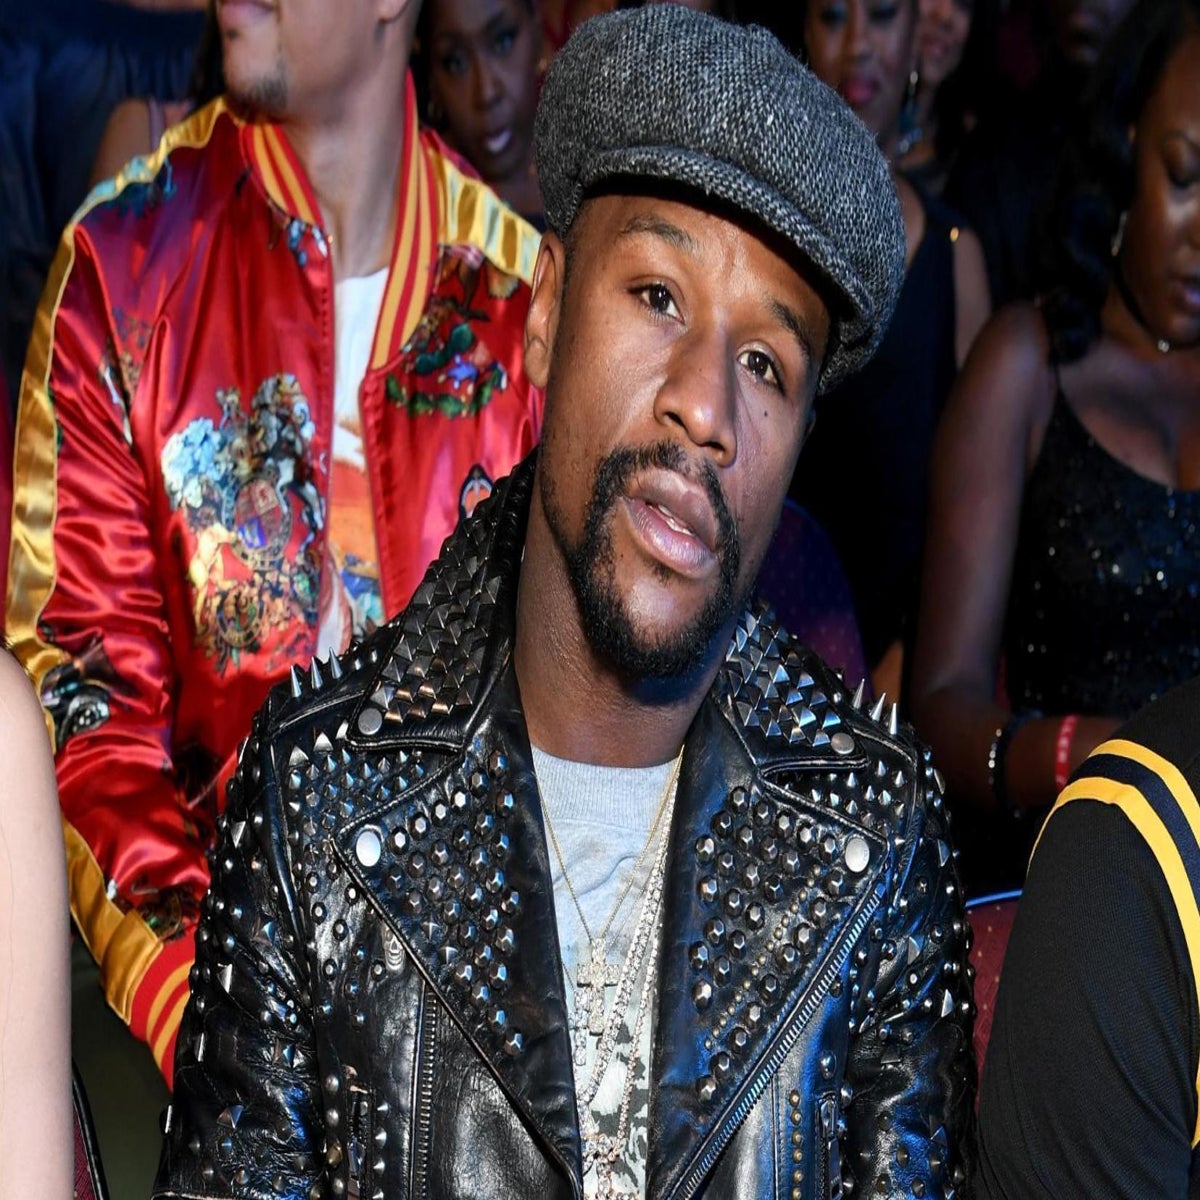 Floyd Mayweather: Clothes, Outfits, Brands, Style and Looks